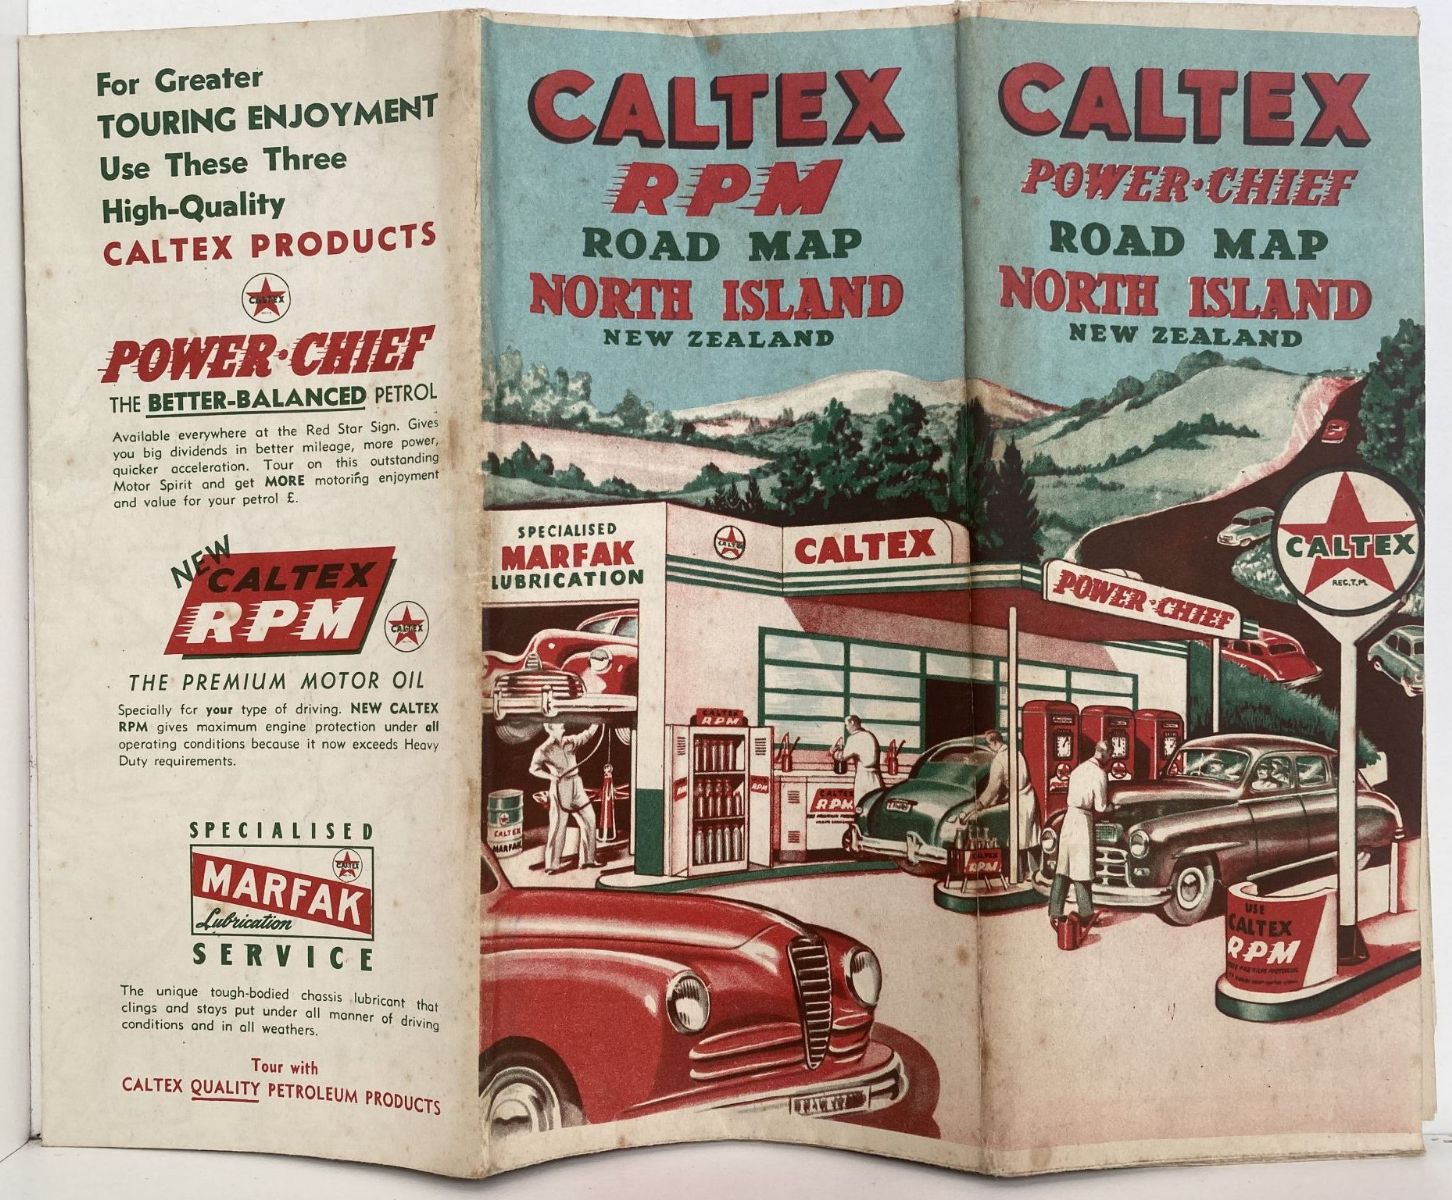 CALTEX Power Chief ROAD MAP of New Zealand - North Island 1940